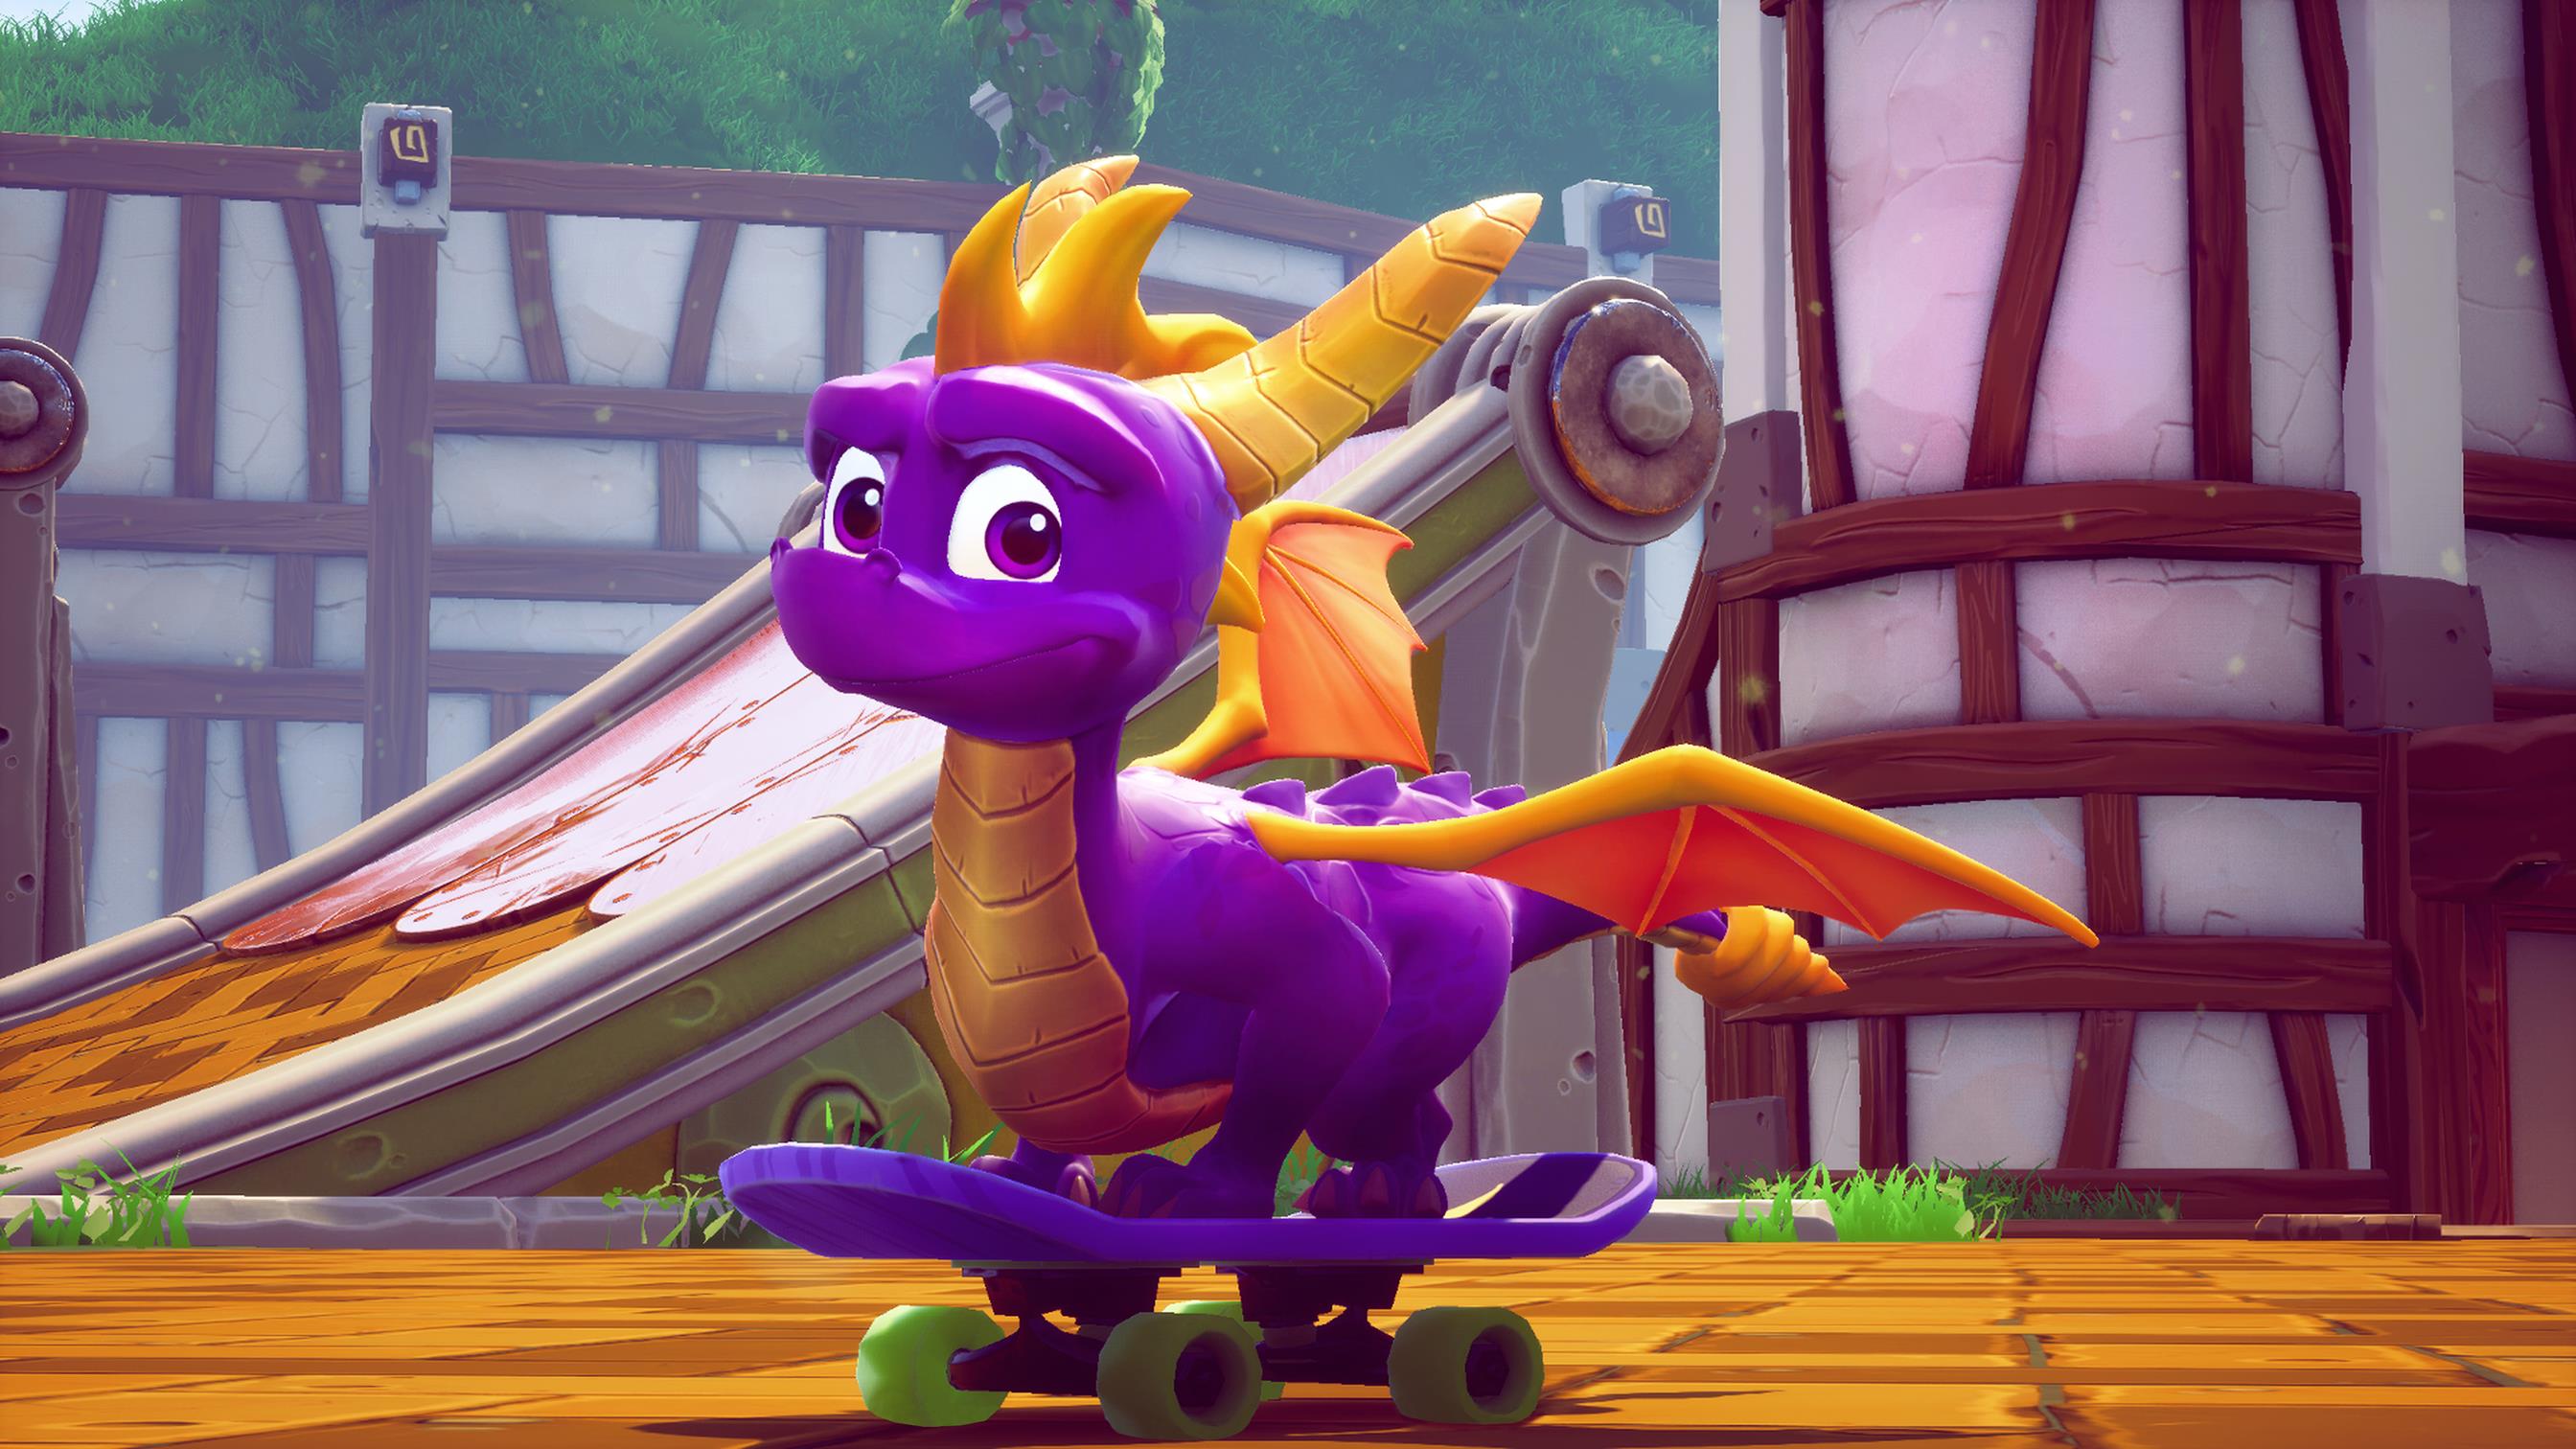 Image for Spyro fan game receives cease and desist notice from Activision